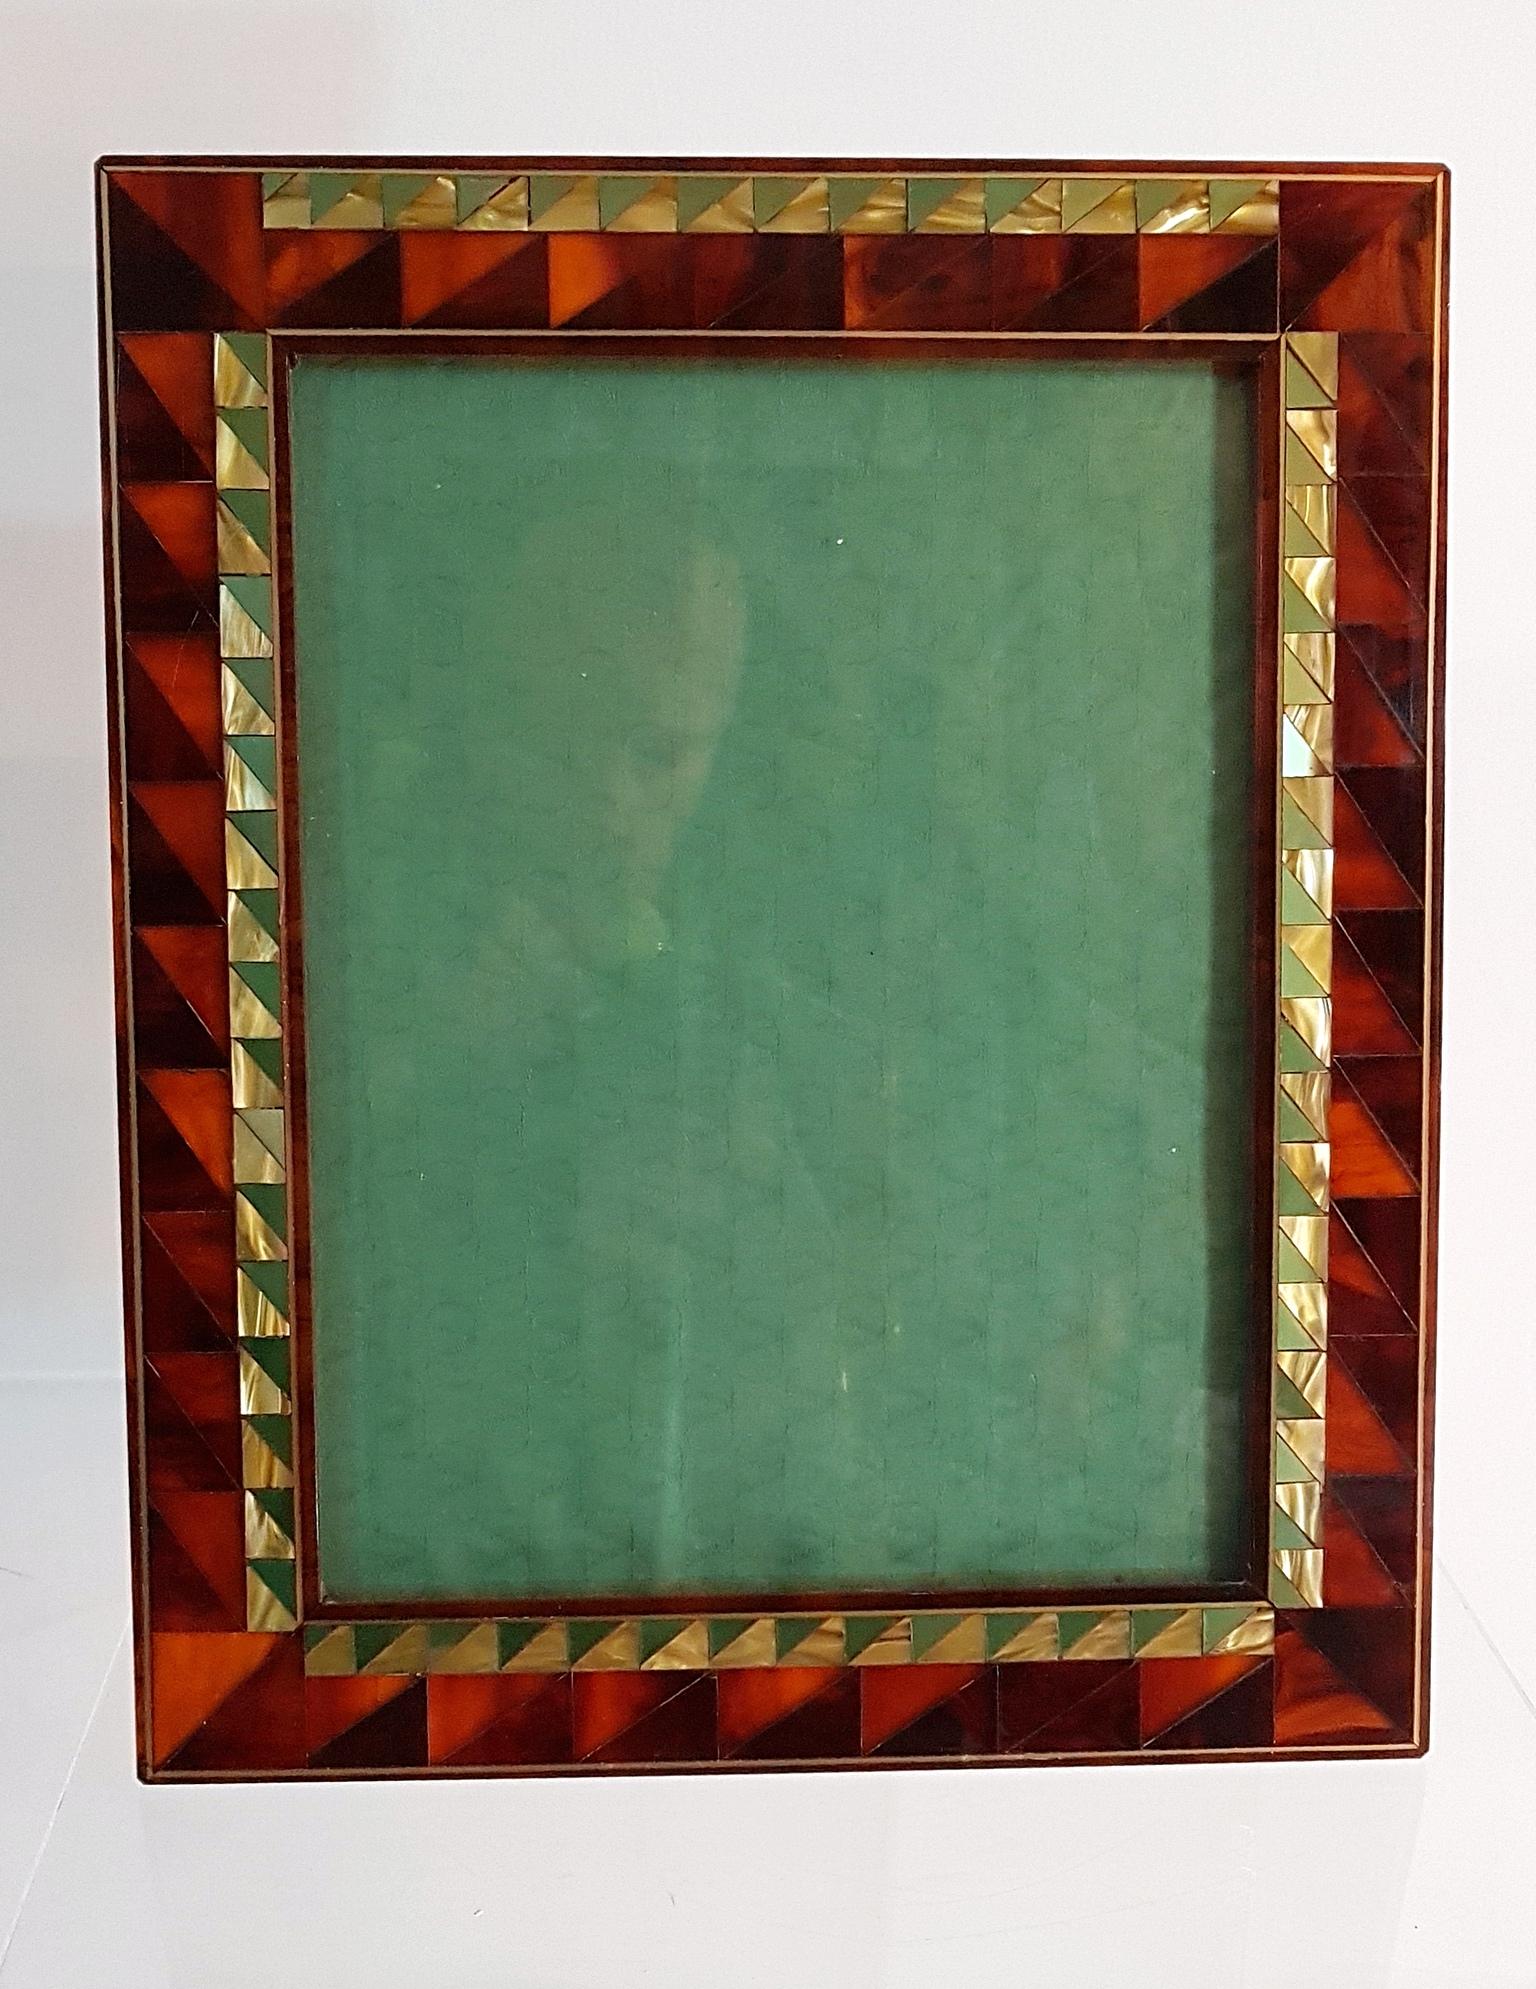 Art Deco style photo/picture frame in tortoiseshell lucite with triangular pattern of mother of pearl. Behind the glass there is a a green fabrick matching the green in the frame with the logo of fashion house of Valentino weaved into the fabric.